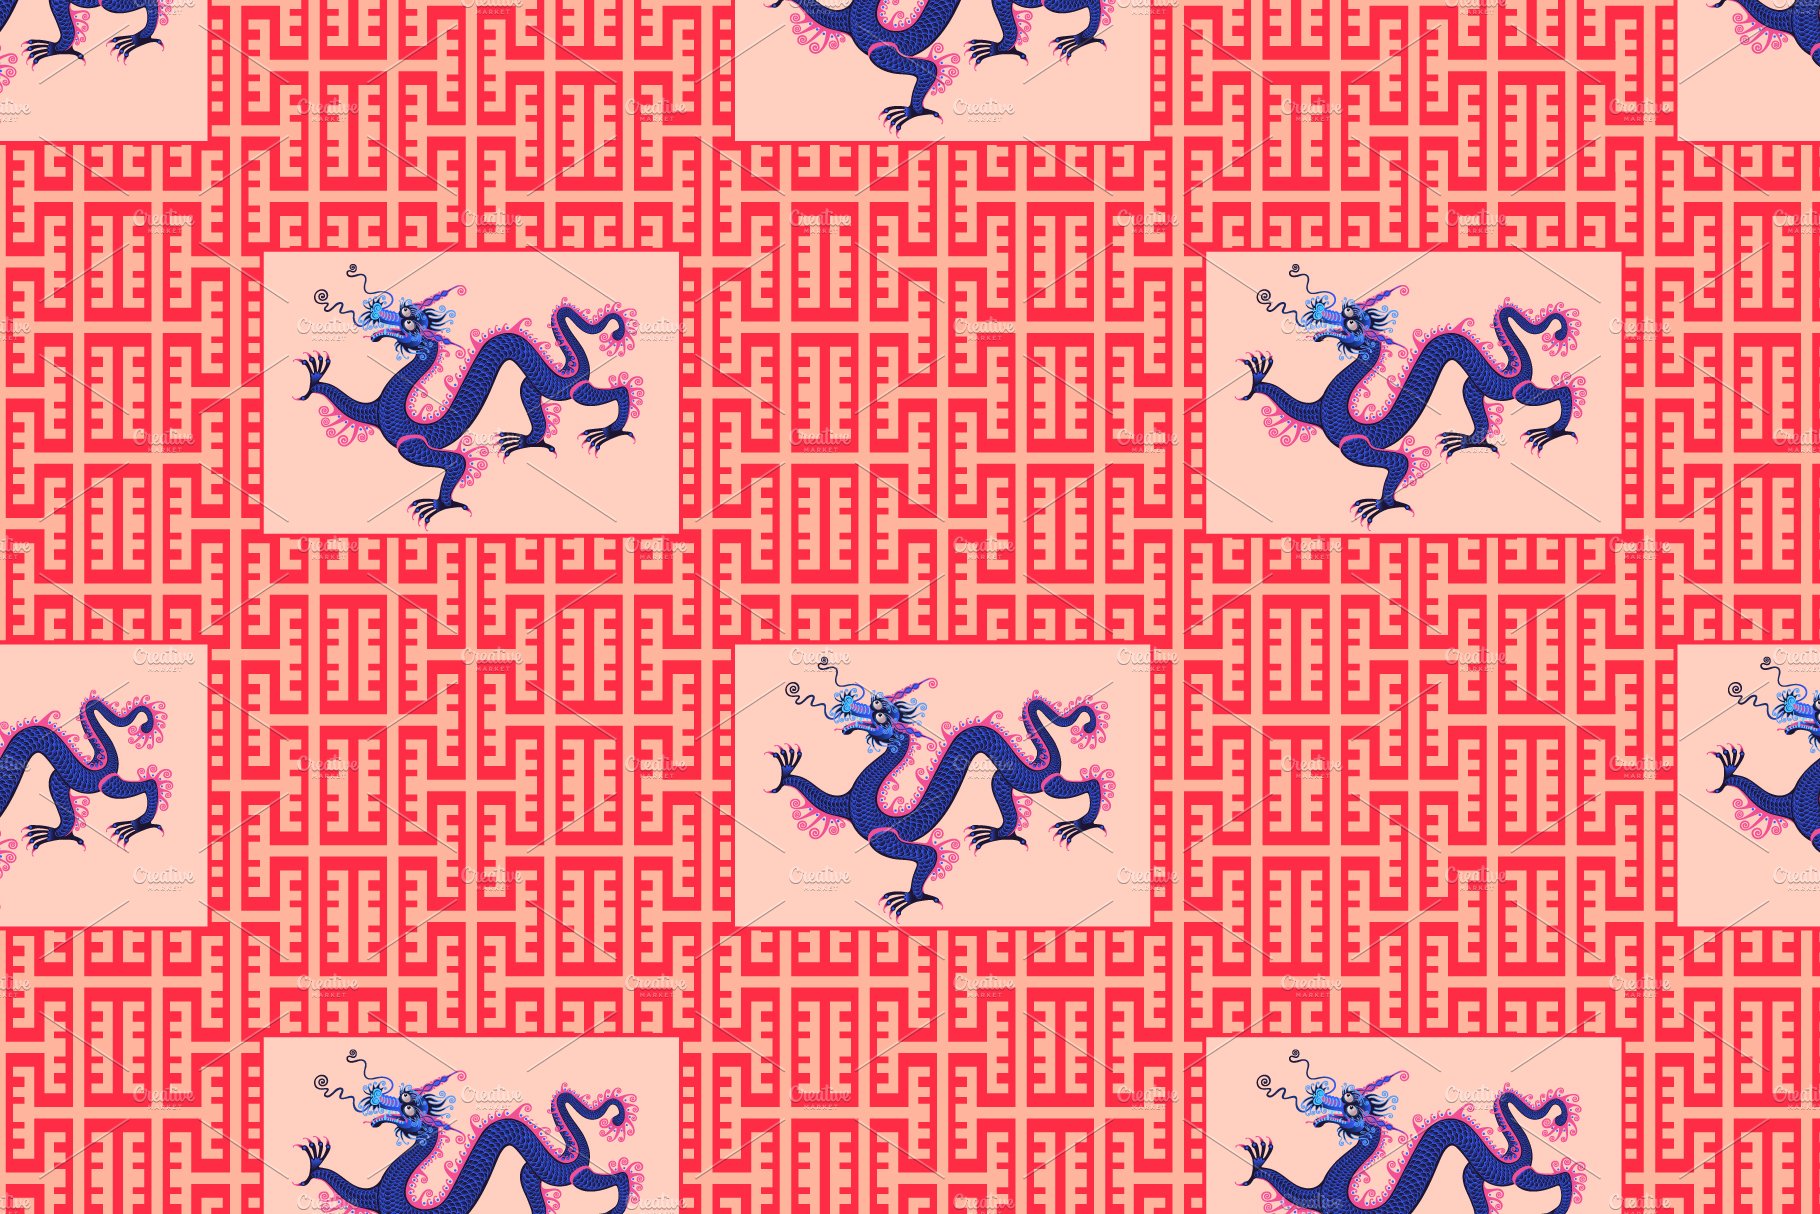 Chinese dragon. Art and pattern preview image.